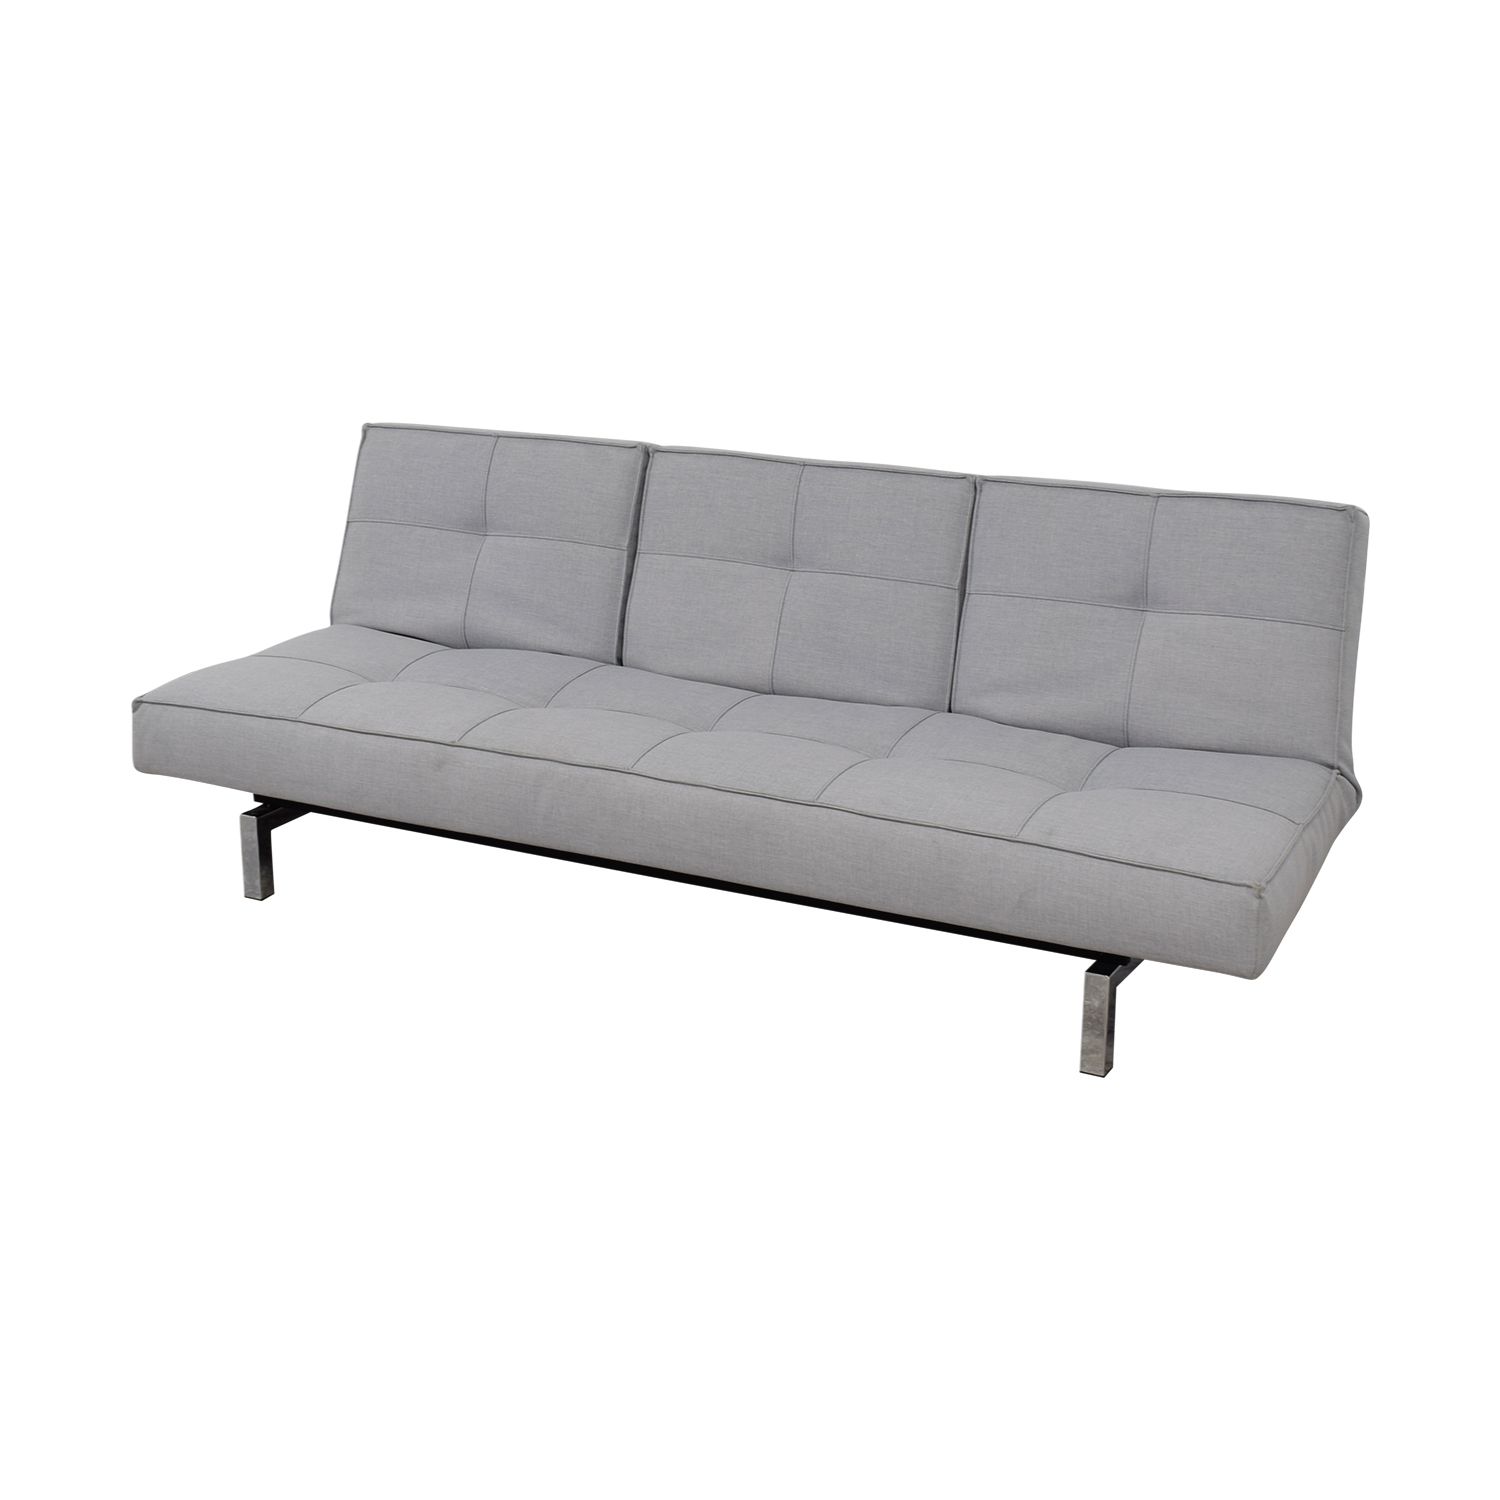 42% Off – Innovation Living Innovation Convertible Grey Tufted Sleeper Throughout Tufted Convertible Sleeper Sofas (Gallery 12 of 20)